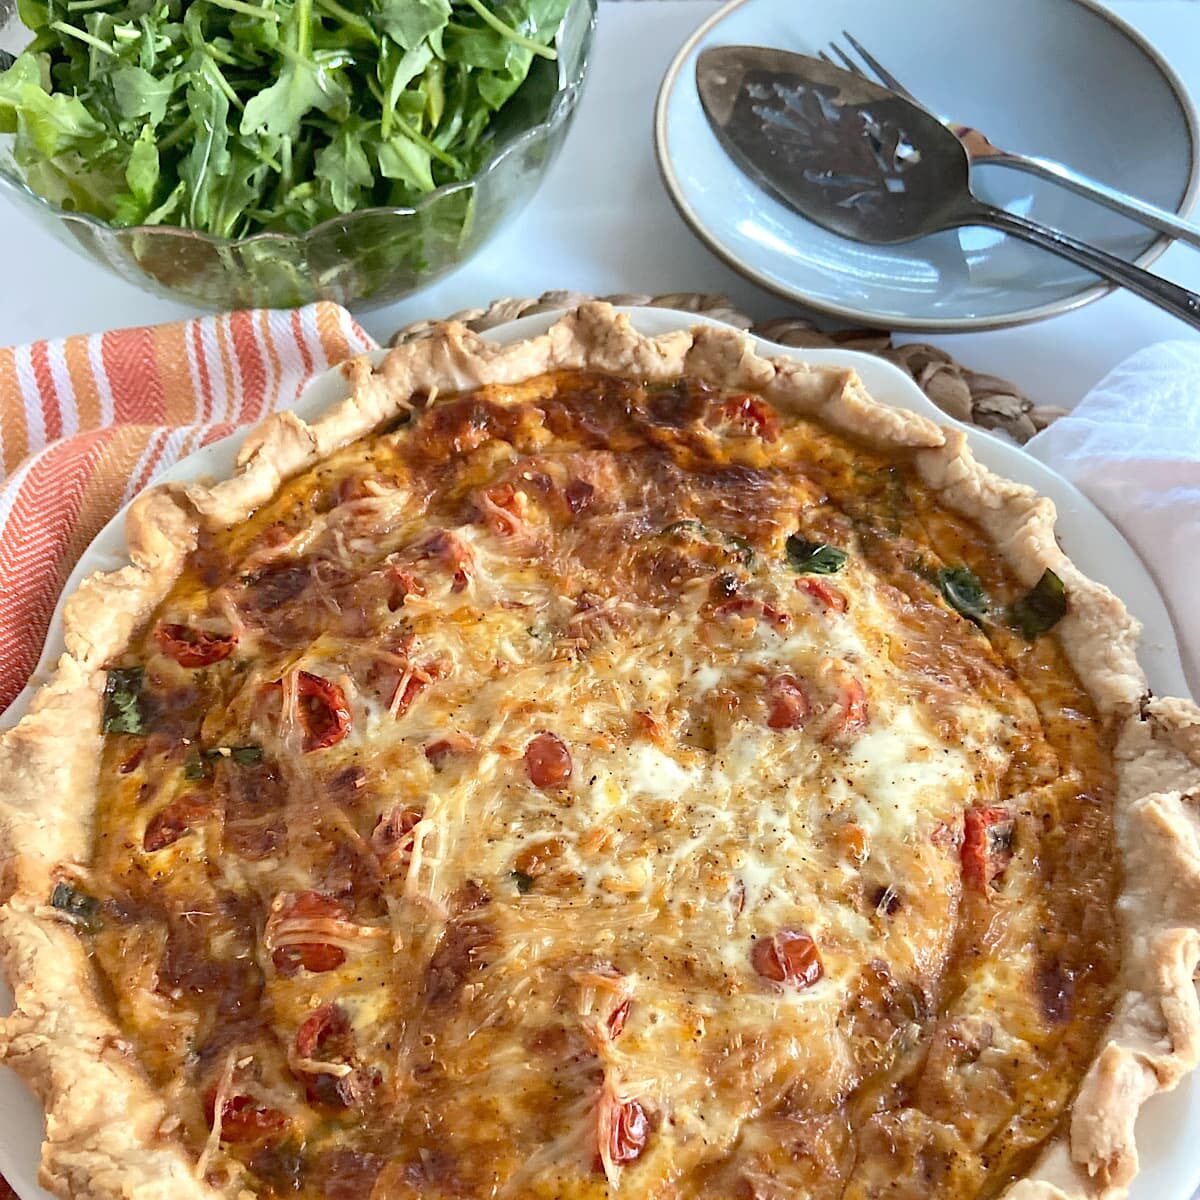 Fresh baked quiche with arugula salad